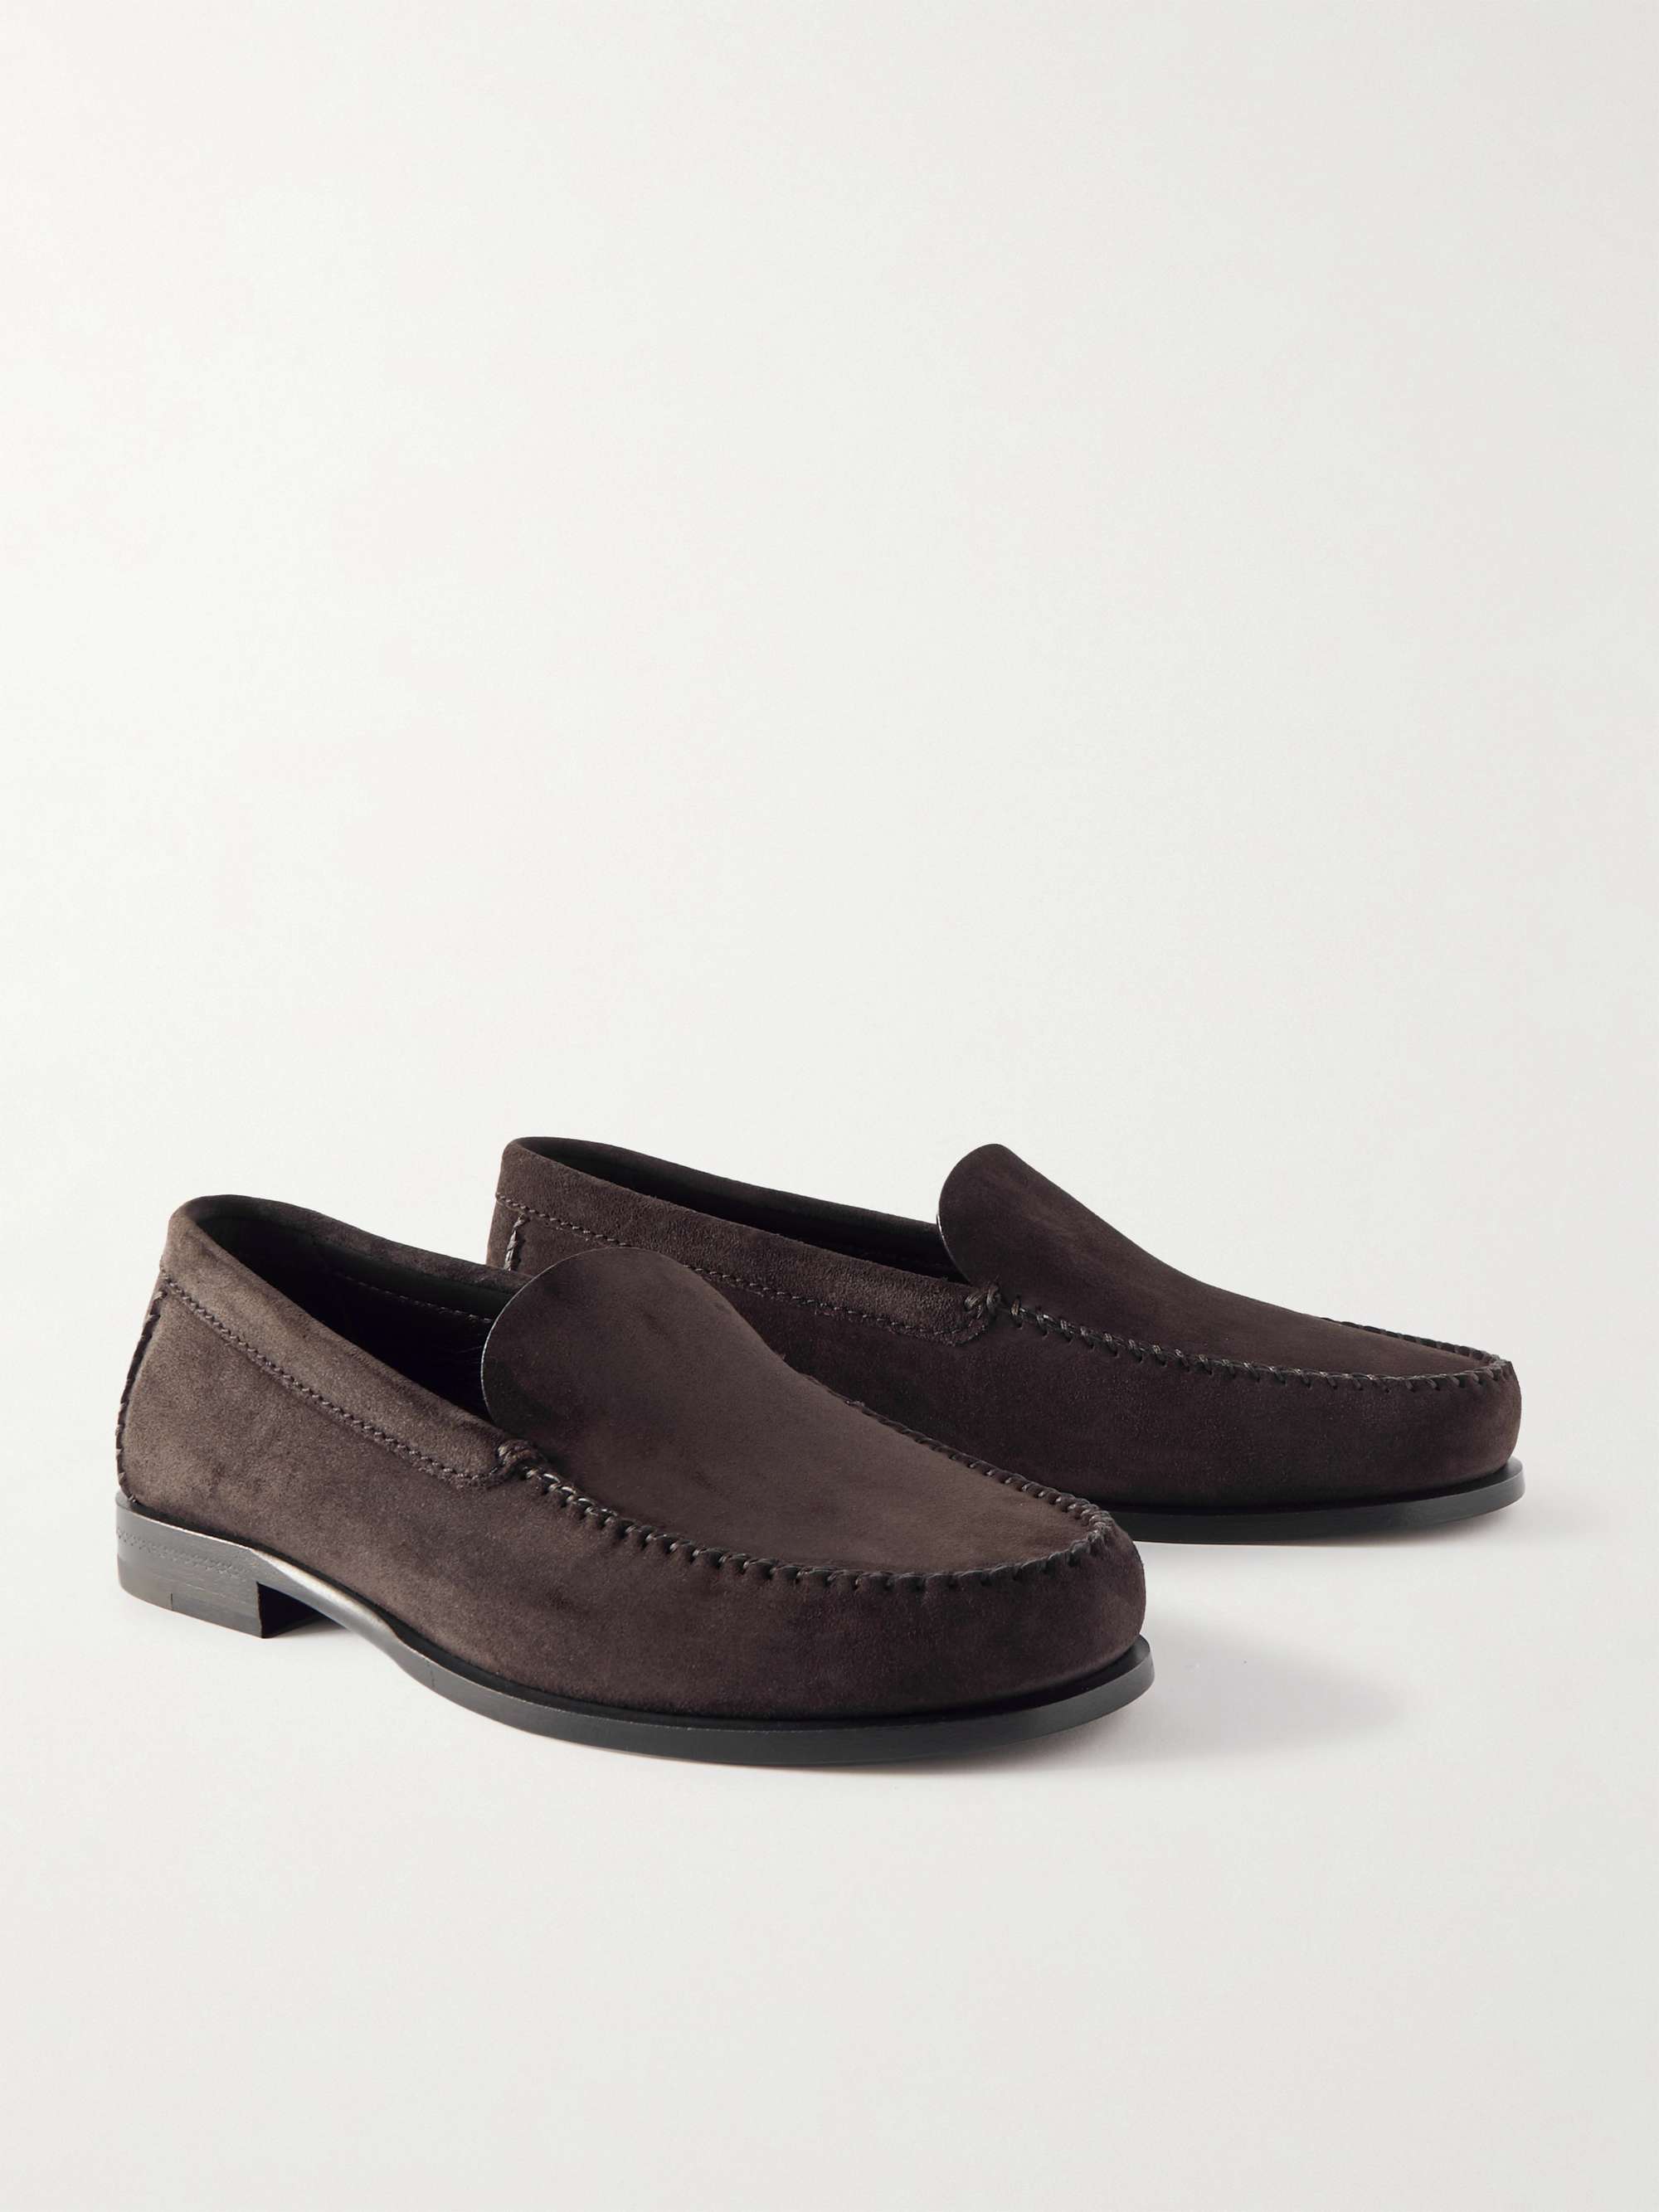 ZEGNA Boston Suede Loafers